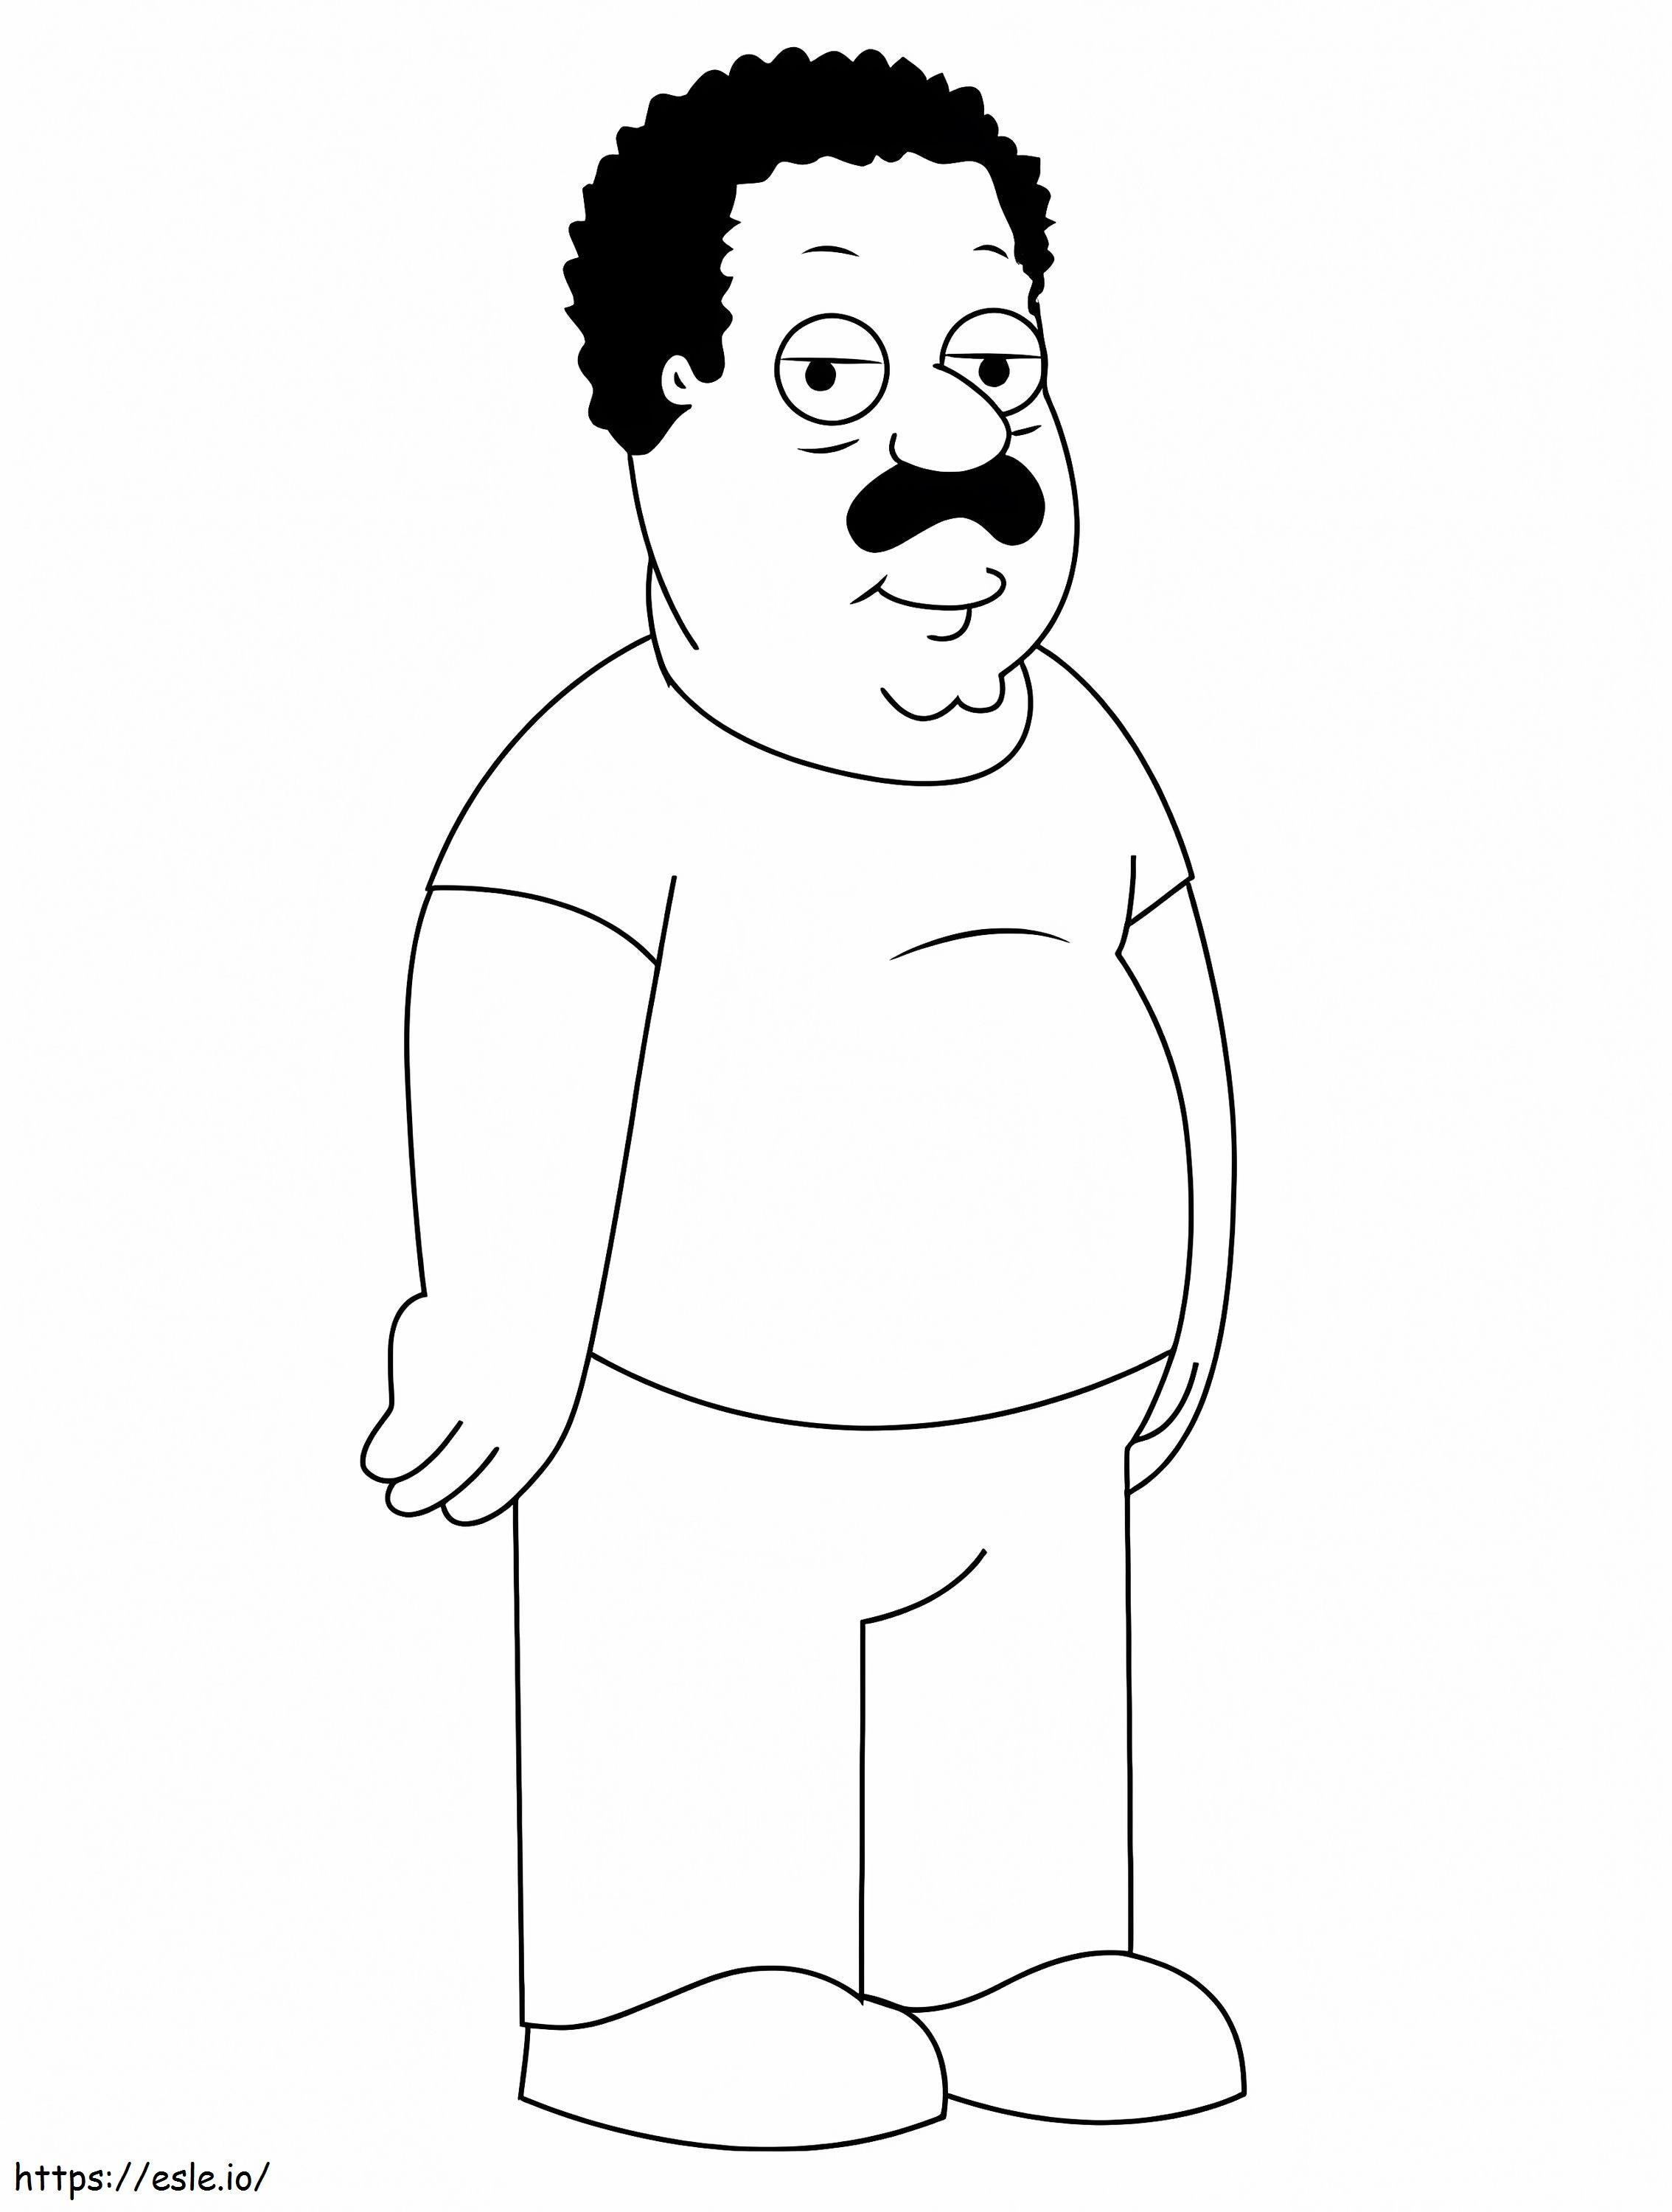 Cleveland Brown Family Guy coloring page